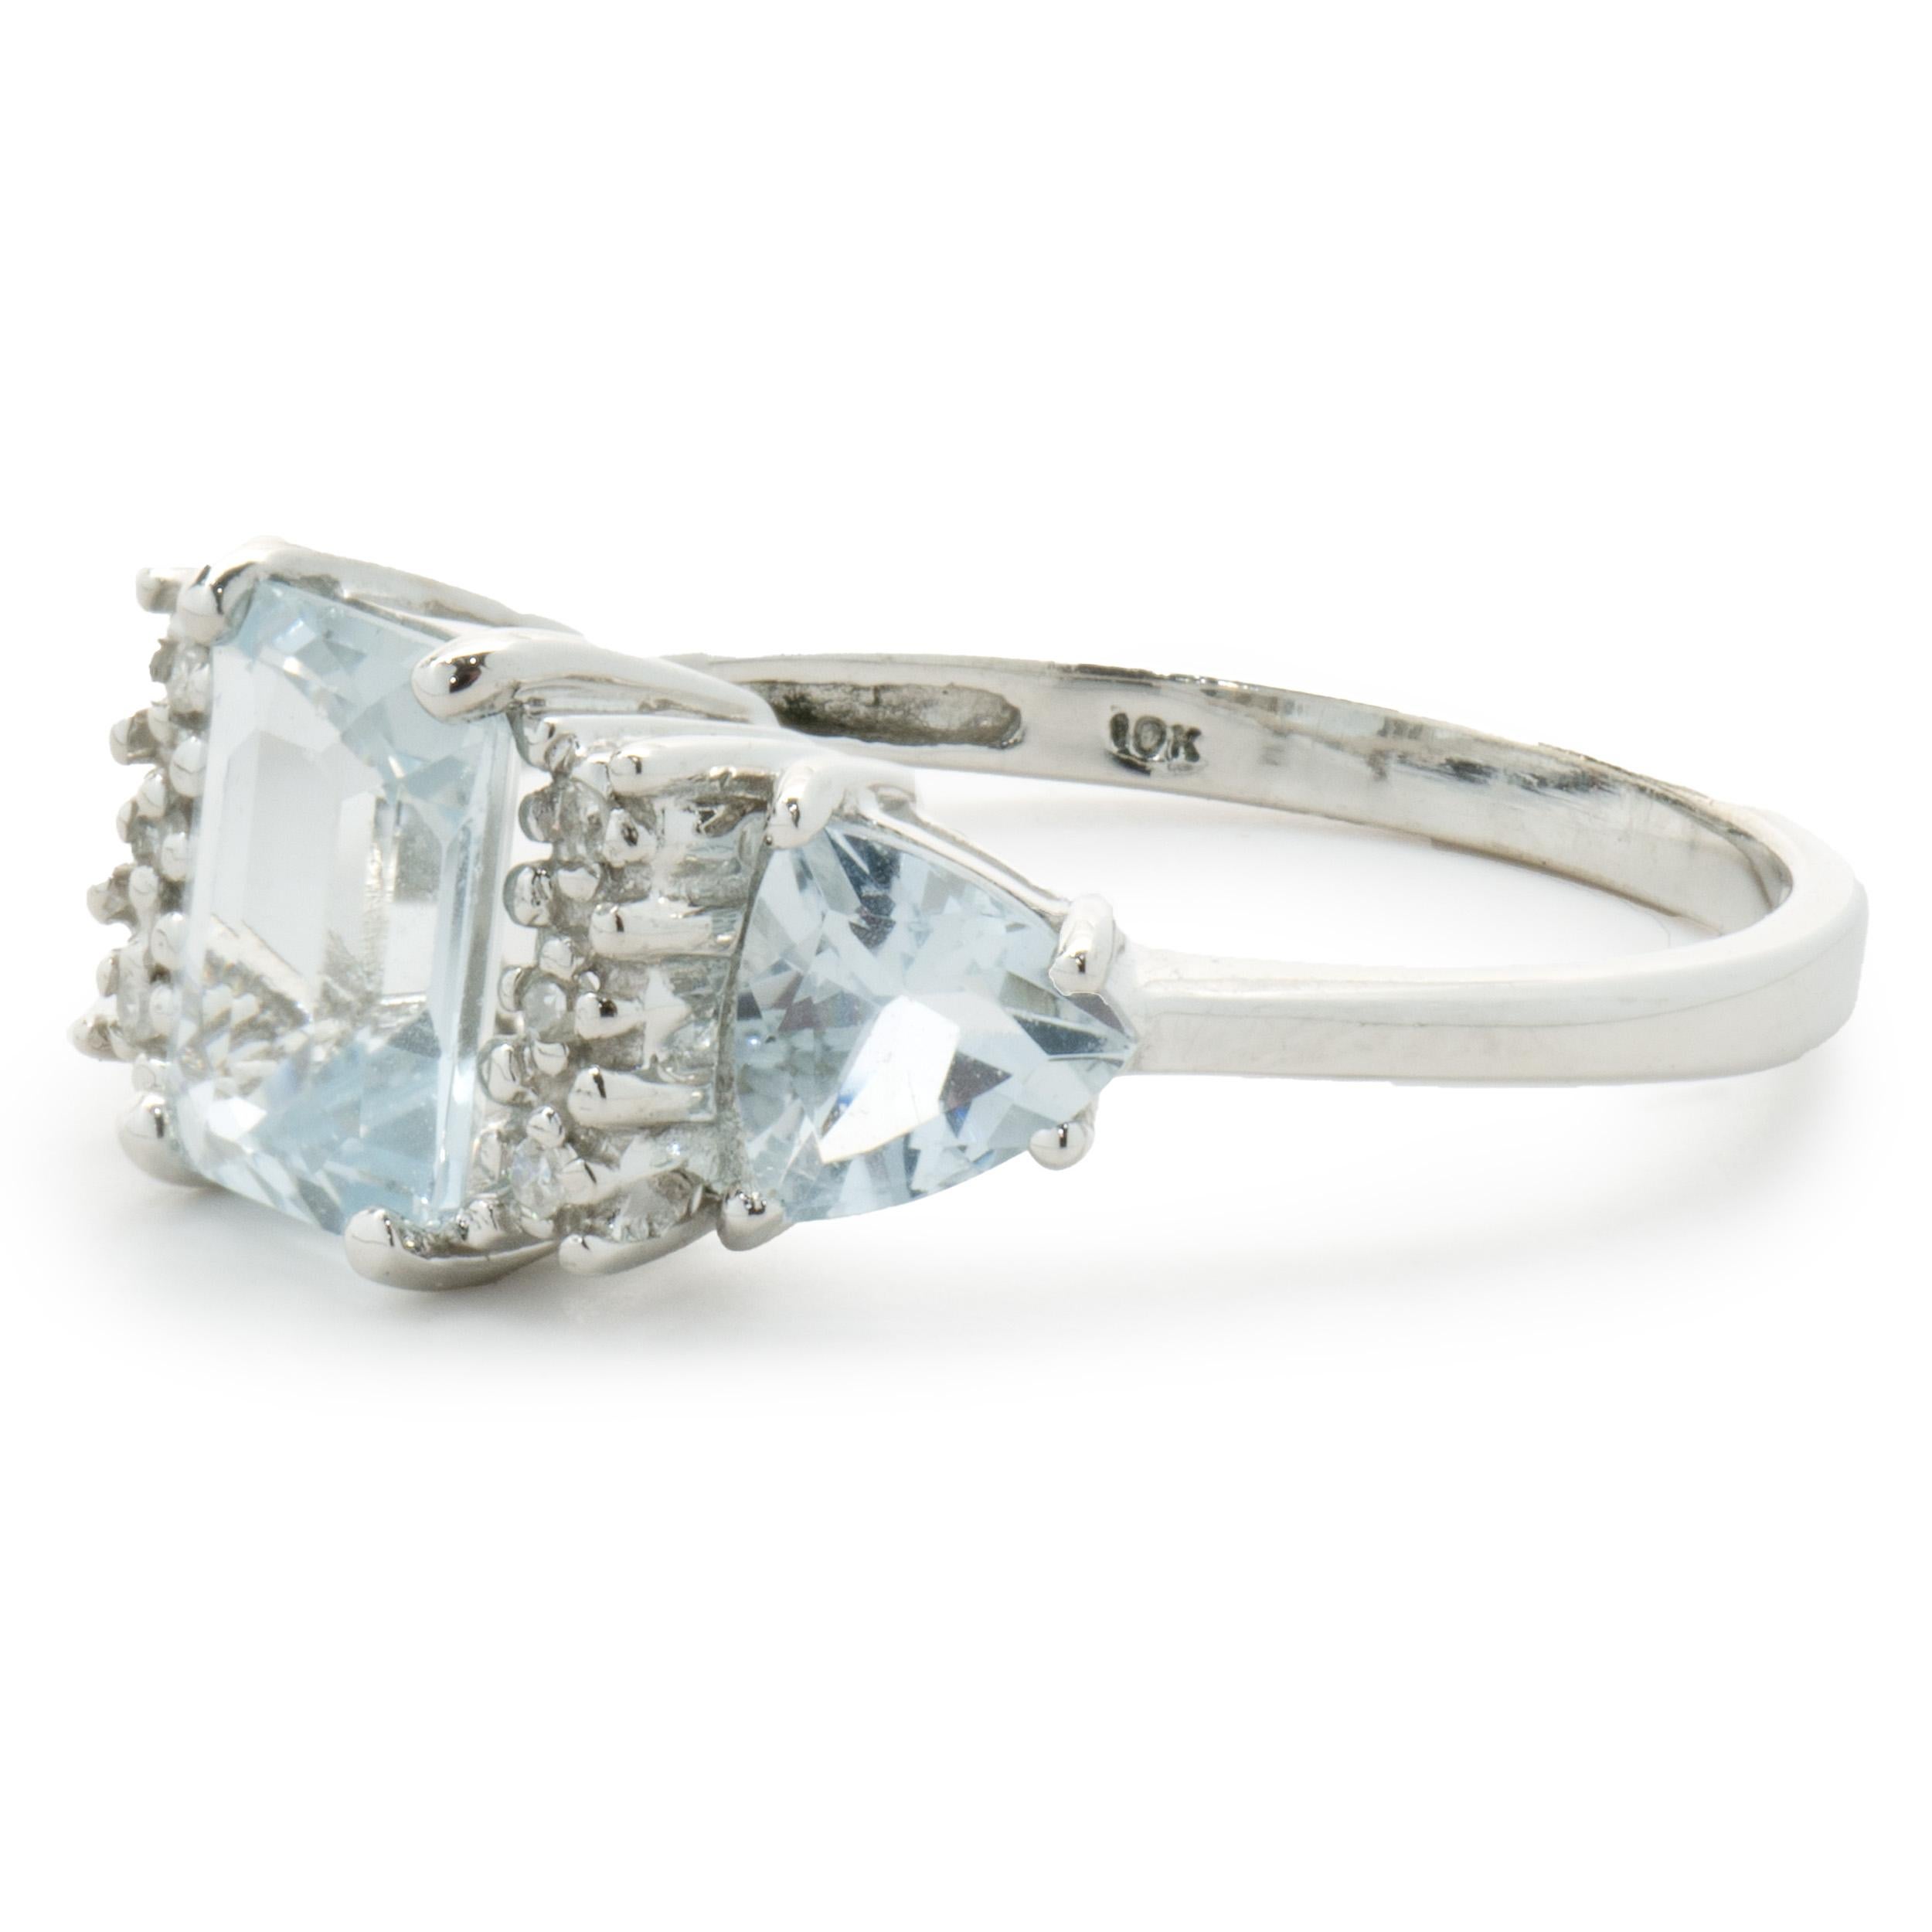 Designer: custom design
Material: 10K white gold
Diamond: 6 single round cut = 0.03cttw
Color: G
Clarity: SI1-2
Aquamarine: 2.10cttw
Dimensions: ring top measures 8.64mm wide
Ring Size: 7 (please allow two extra shipping days for sizing requests)